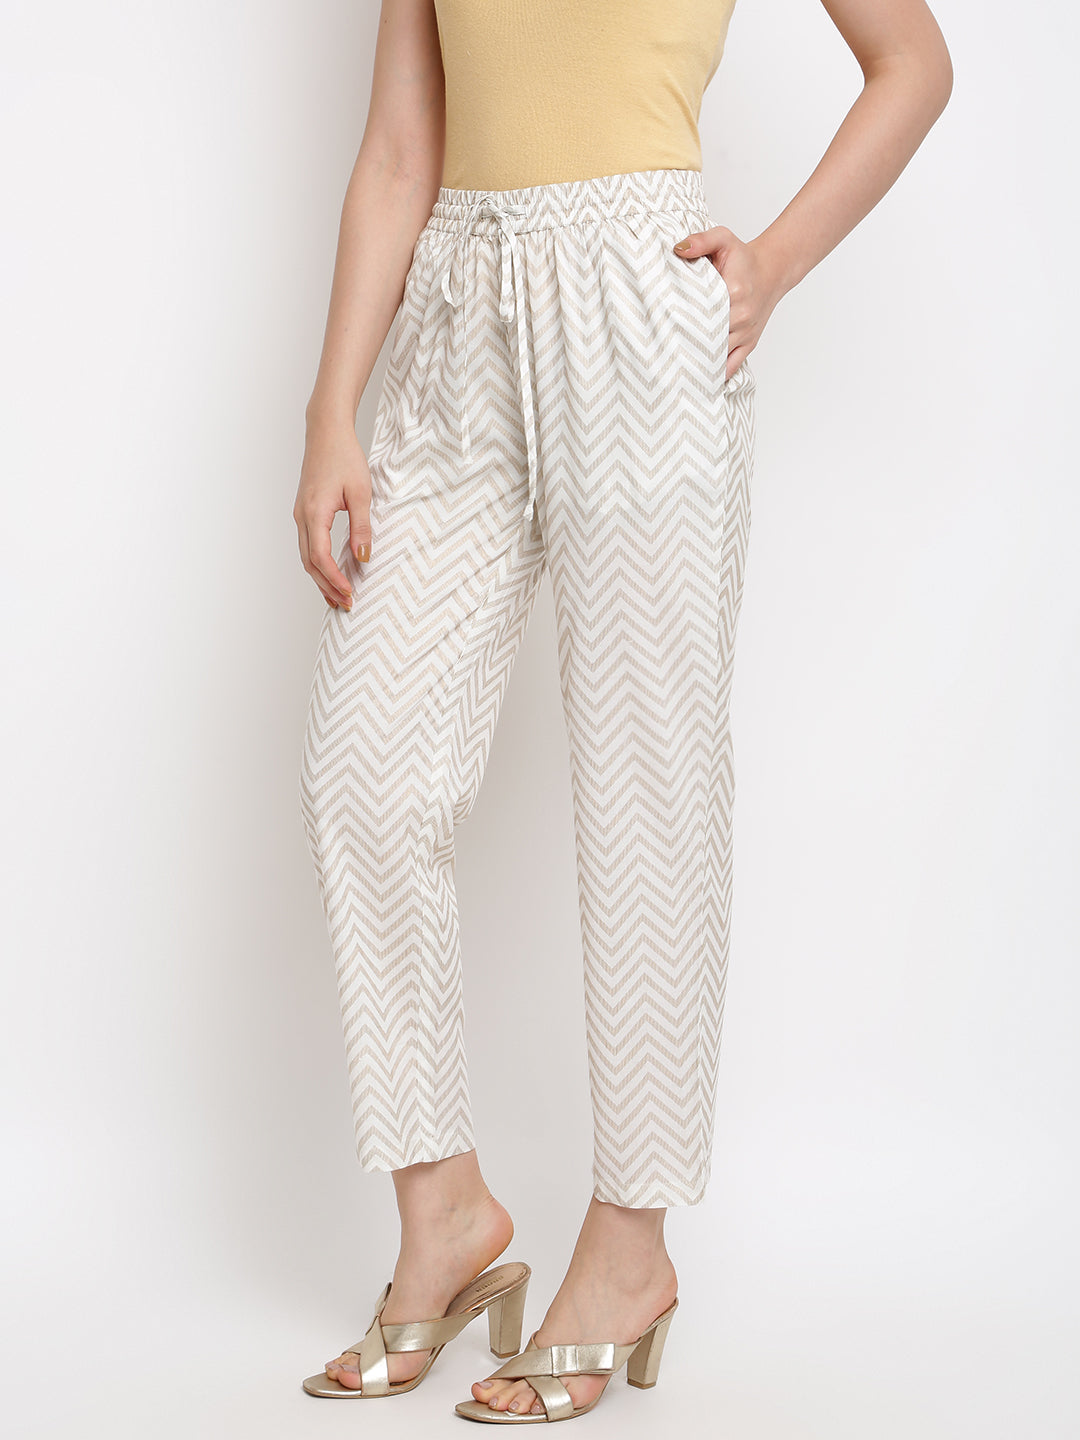 Off-White Printed Mirror Work Straight Pant